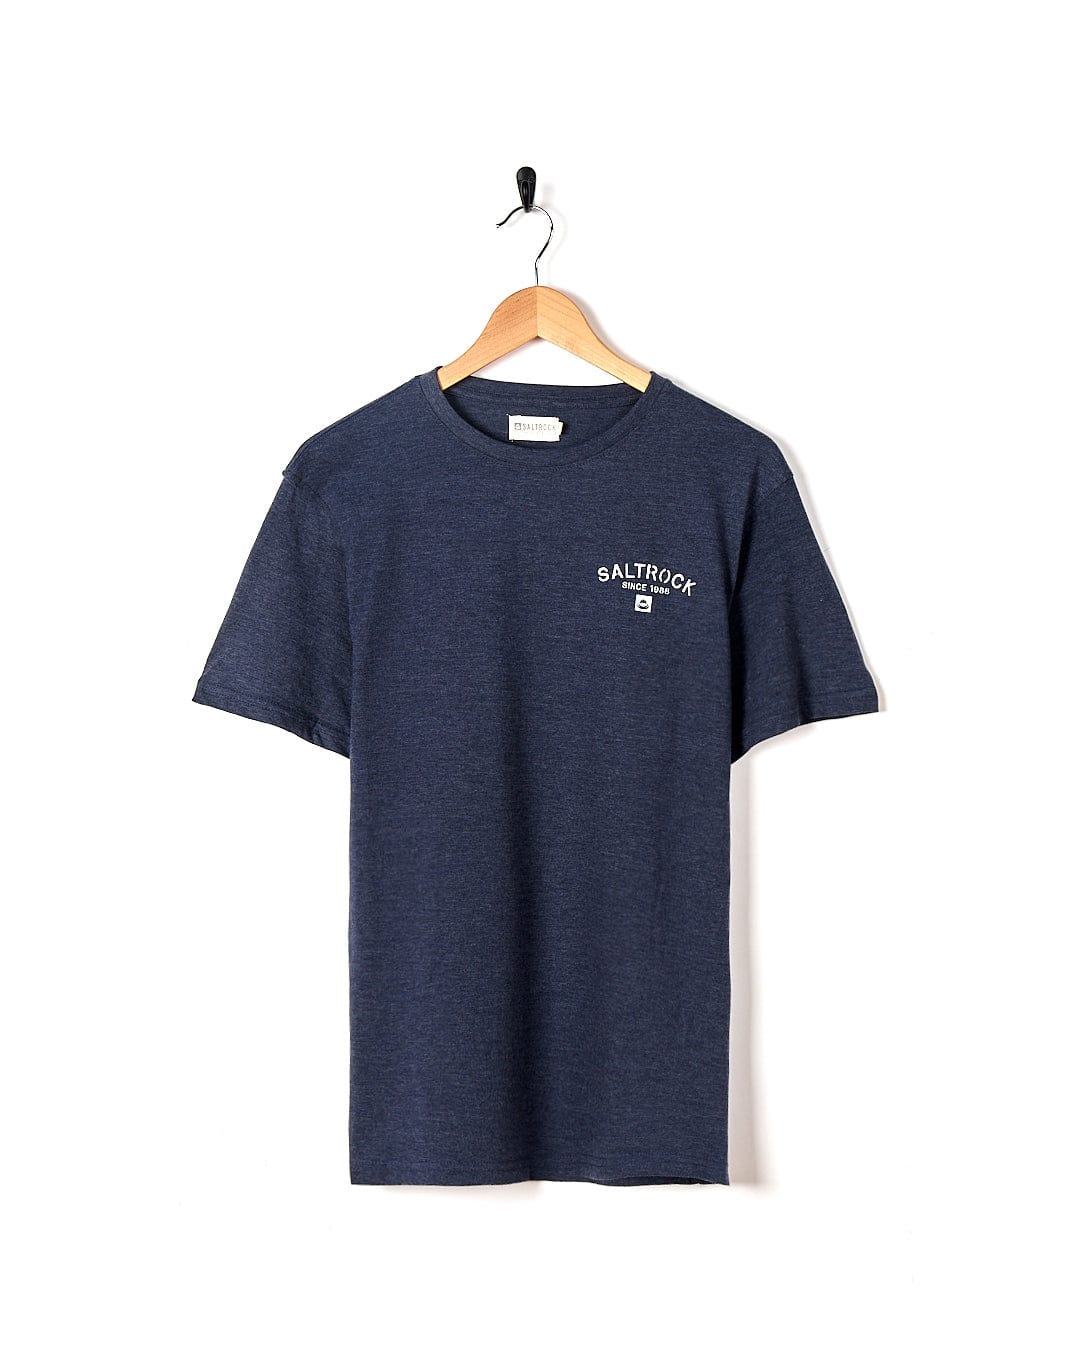 A Saltrock Stencil - Mens Location T-Shirt - Tenby - Dress Blue with a white logo on it.